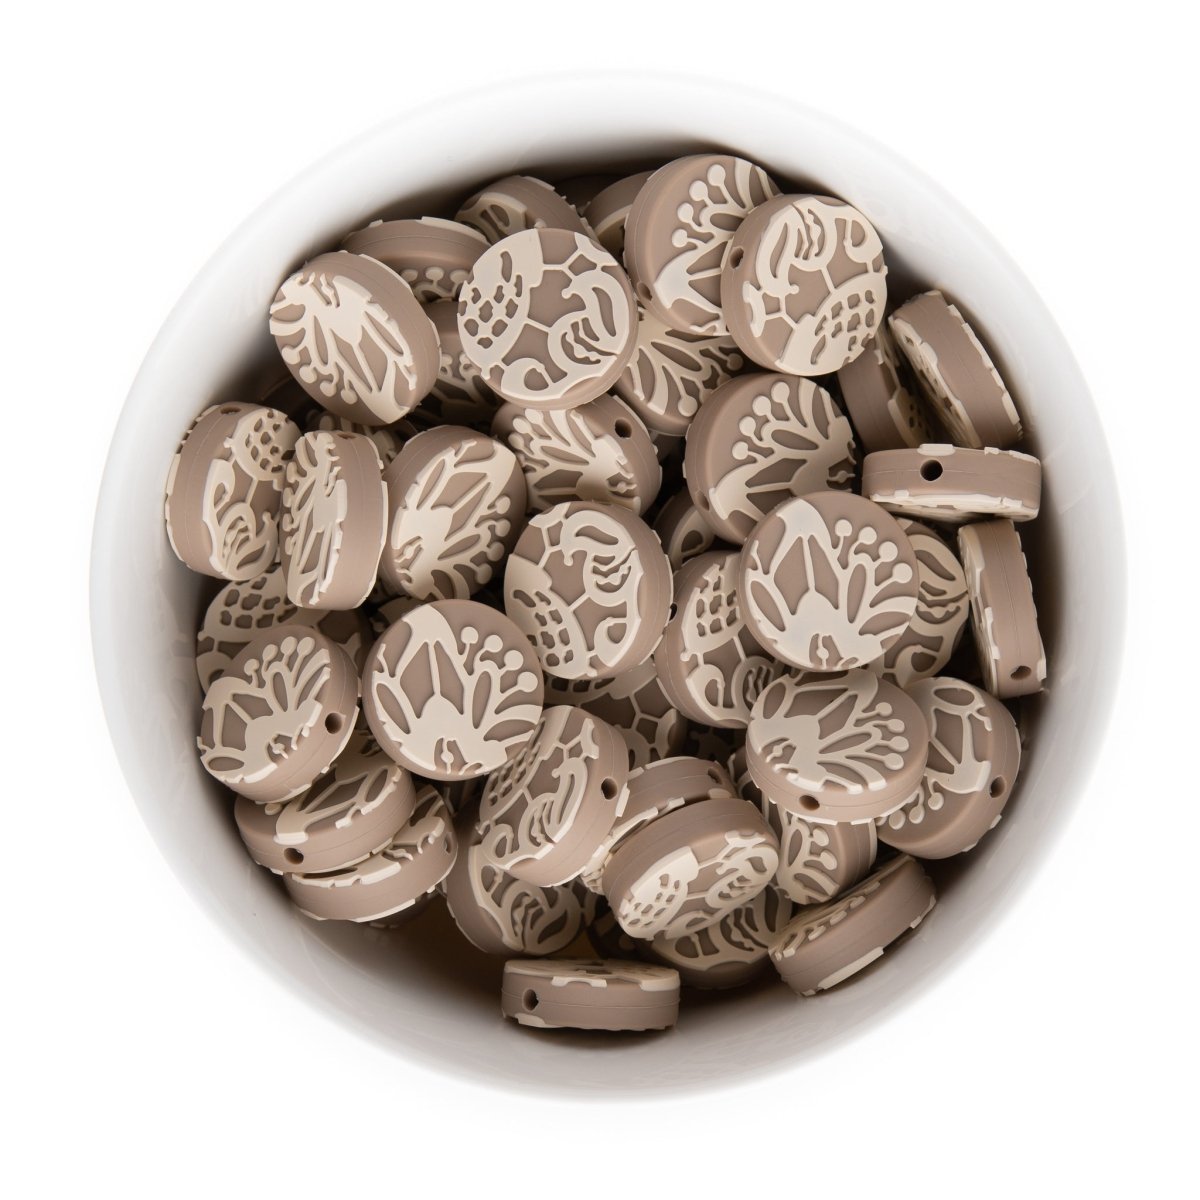 Silicone Focal Beads Lace Cappuccino from Cara & Co Craft Supply